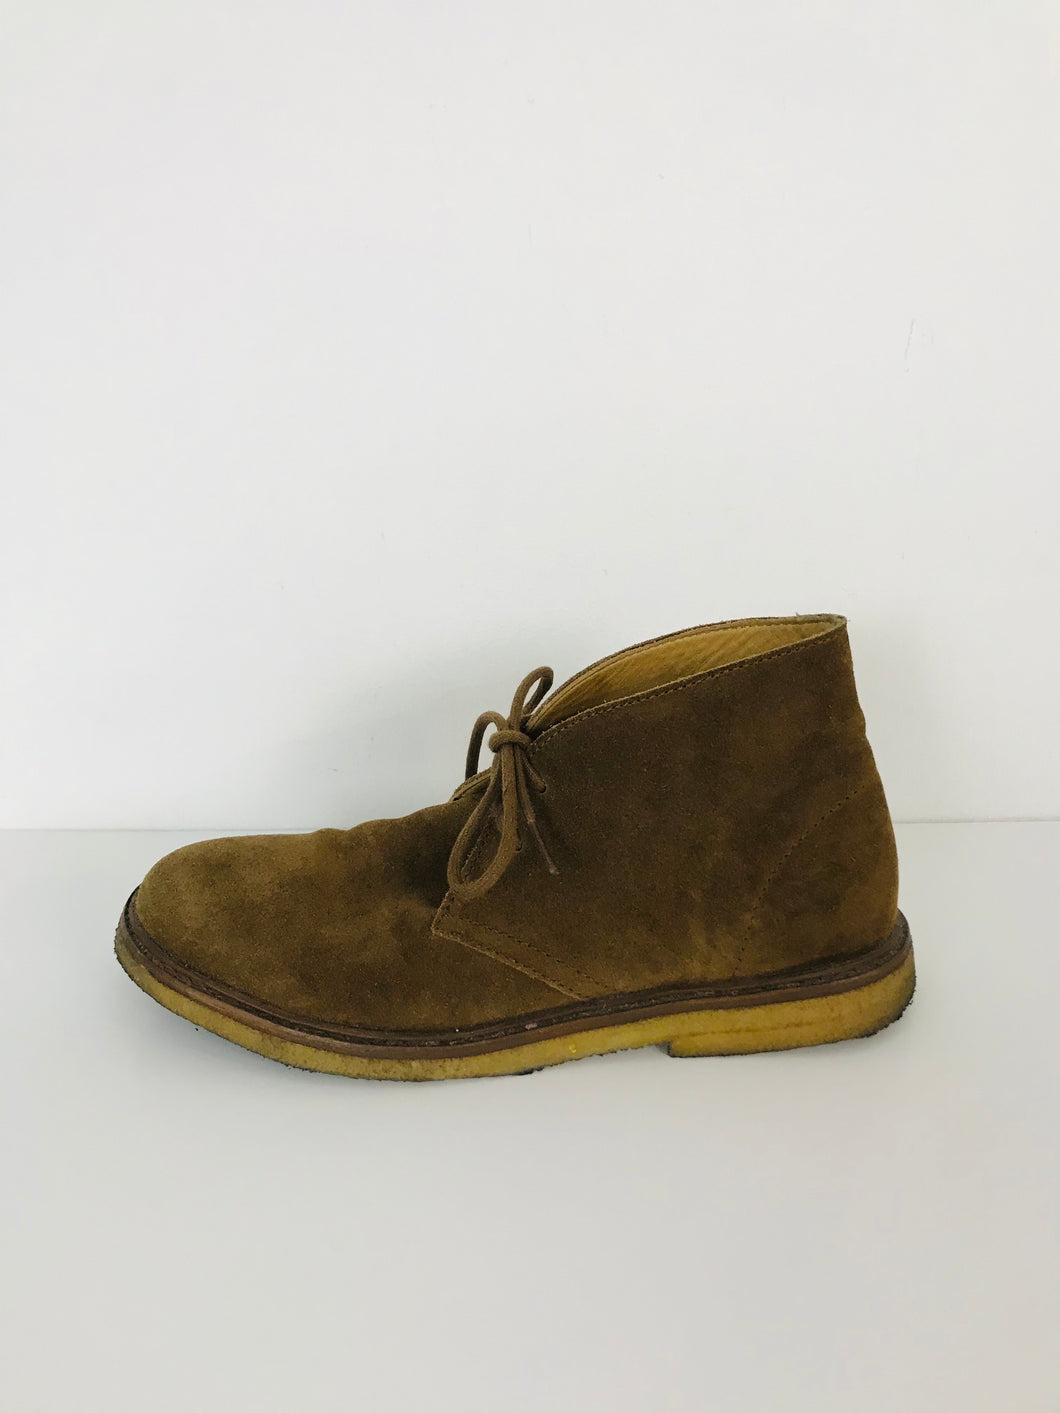 A.P.C Women's Suede Ankle Desert Boots | 41 UK7 | Brown